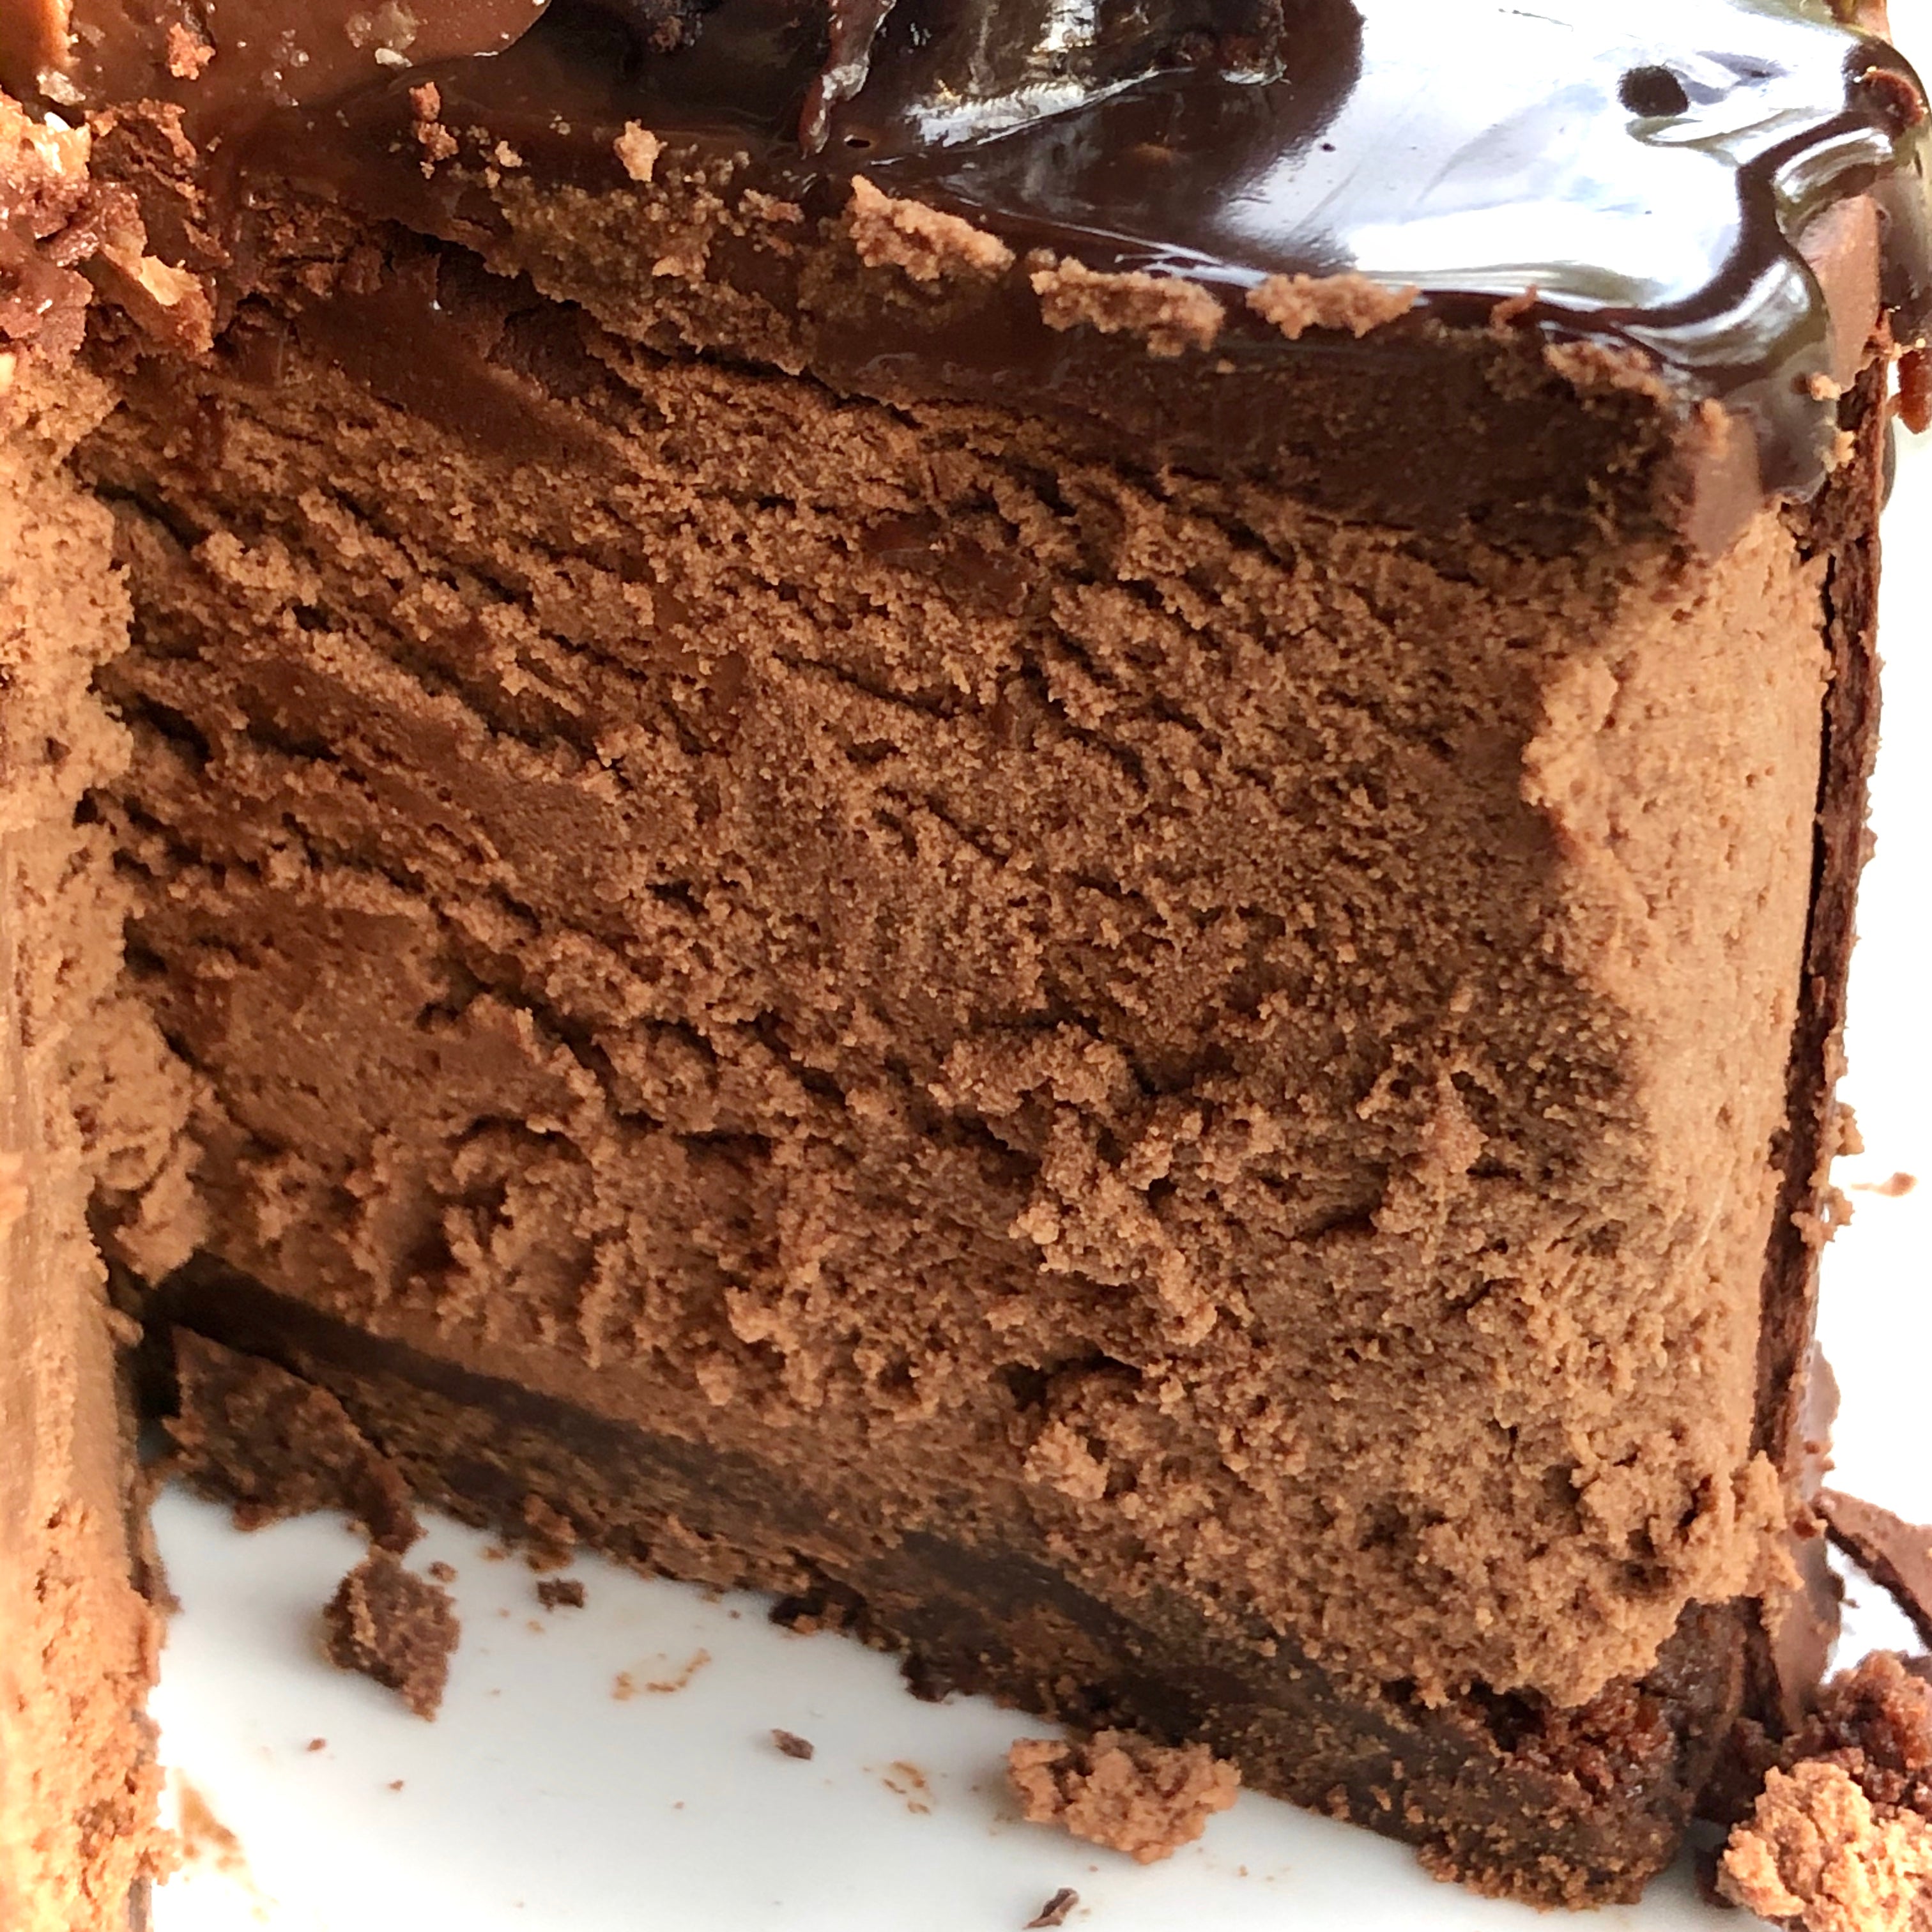 A cut slice of chocolate mousse cake with brownie base and fluffy velvet textured mousse.